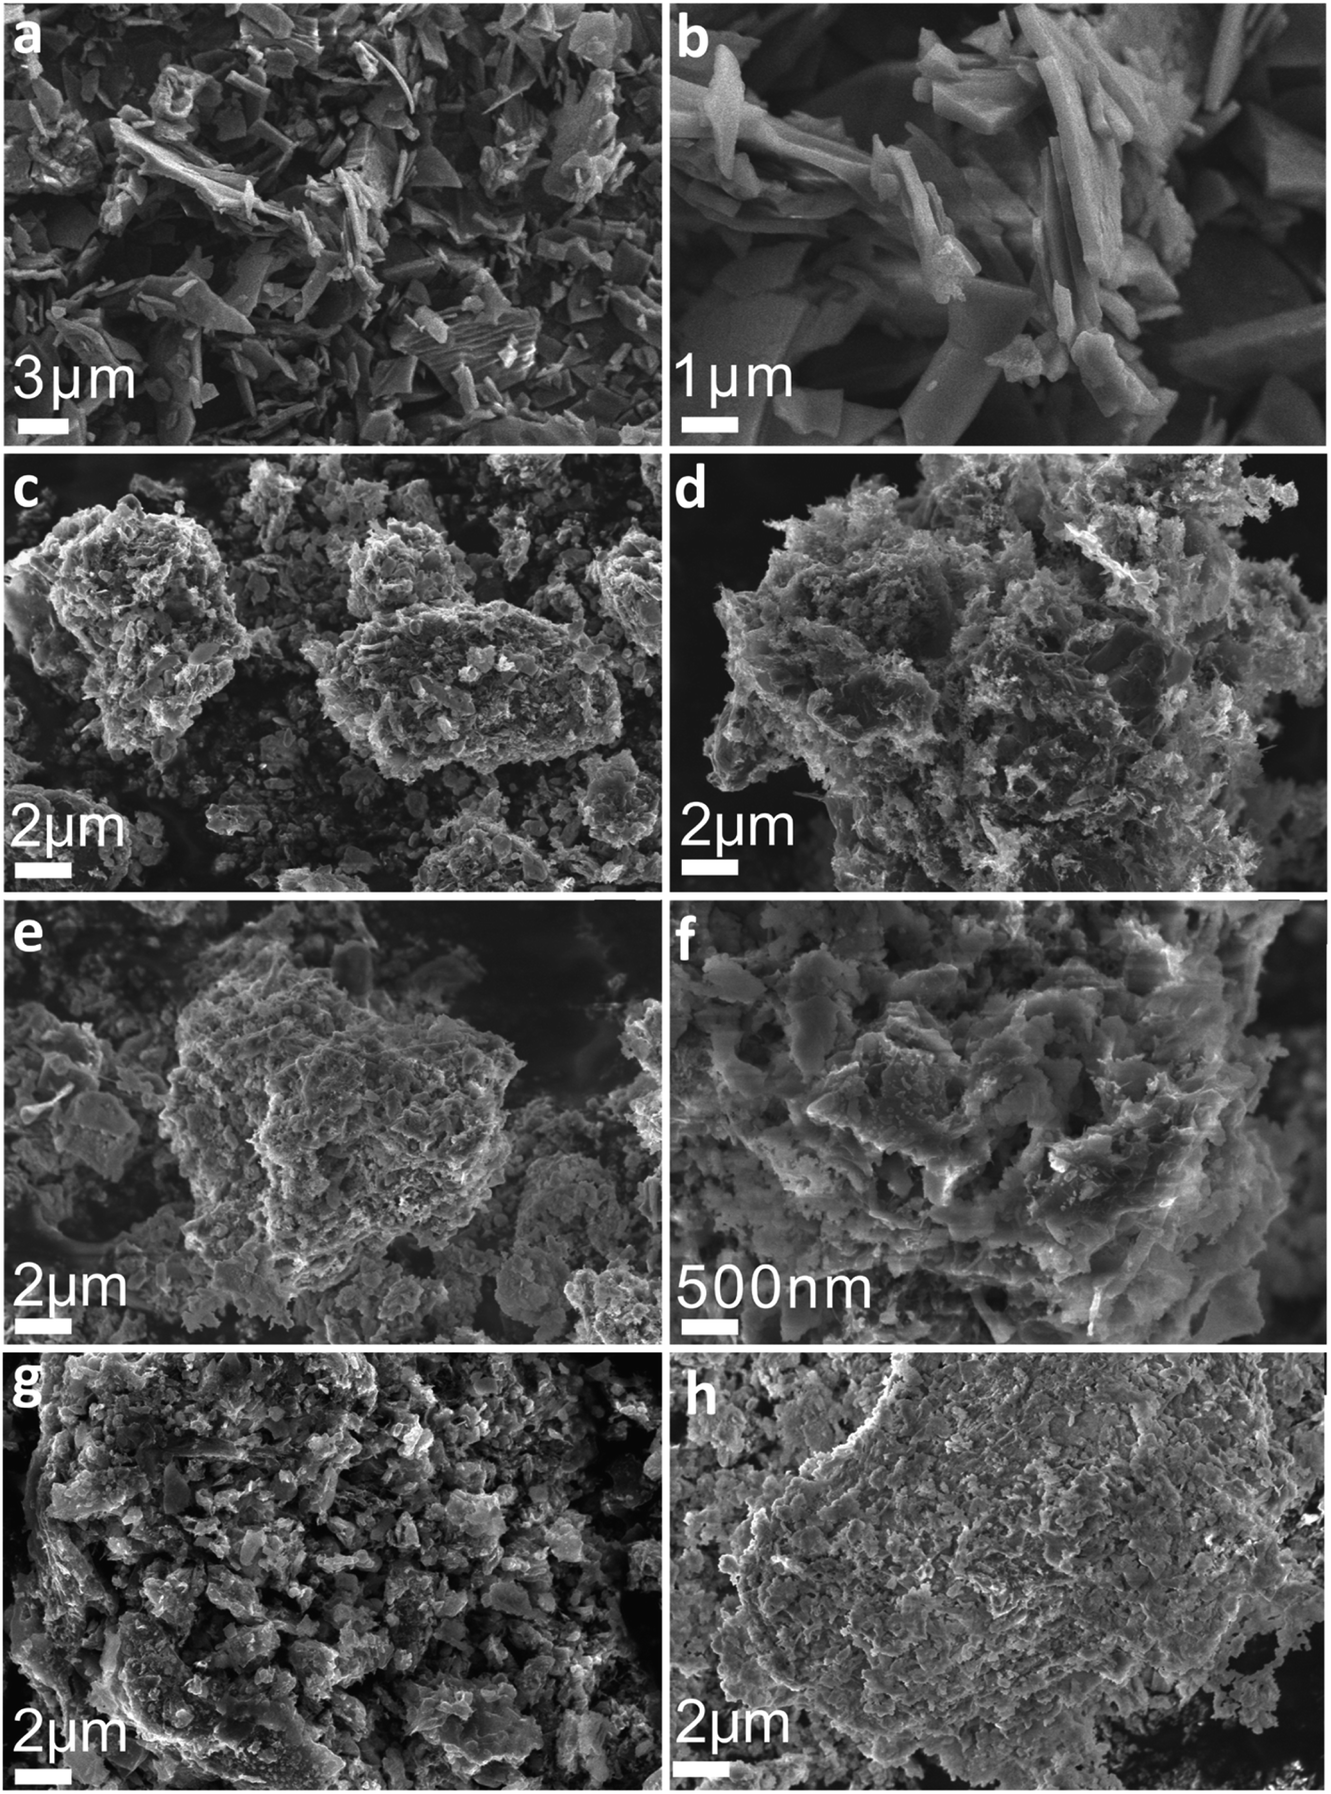 A Novel And Low Cost Cupc C Catalyst Derived From The Compounds Of Sunflower Straw And Copper Phthalocyanine Pigment For Oxygen Reduction Reaction Rsc Advances Rsc Publishing Doi 10 1039 D1raf